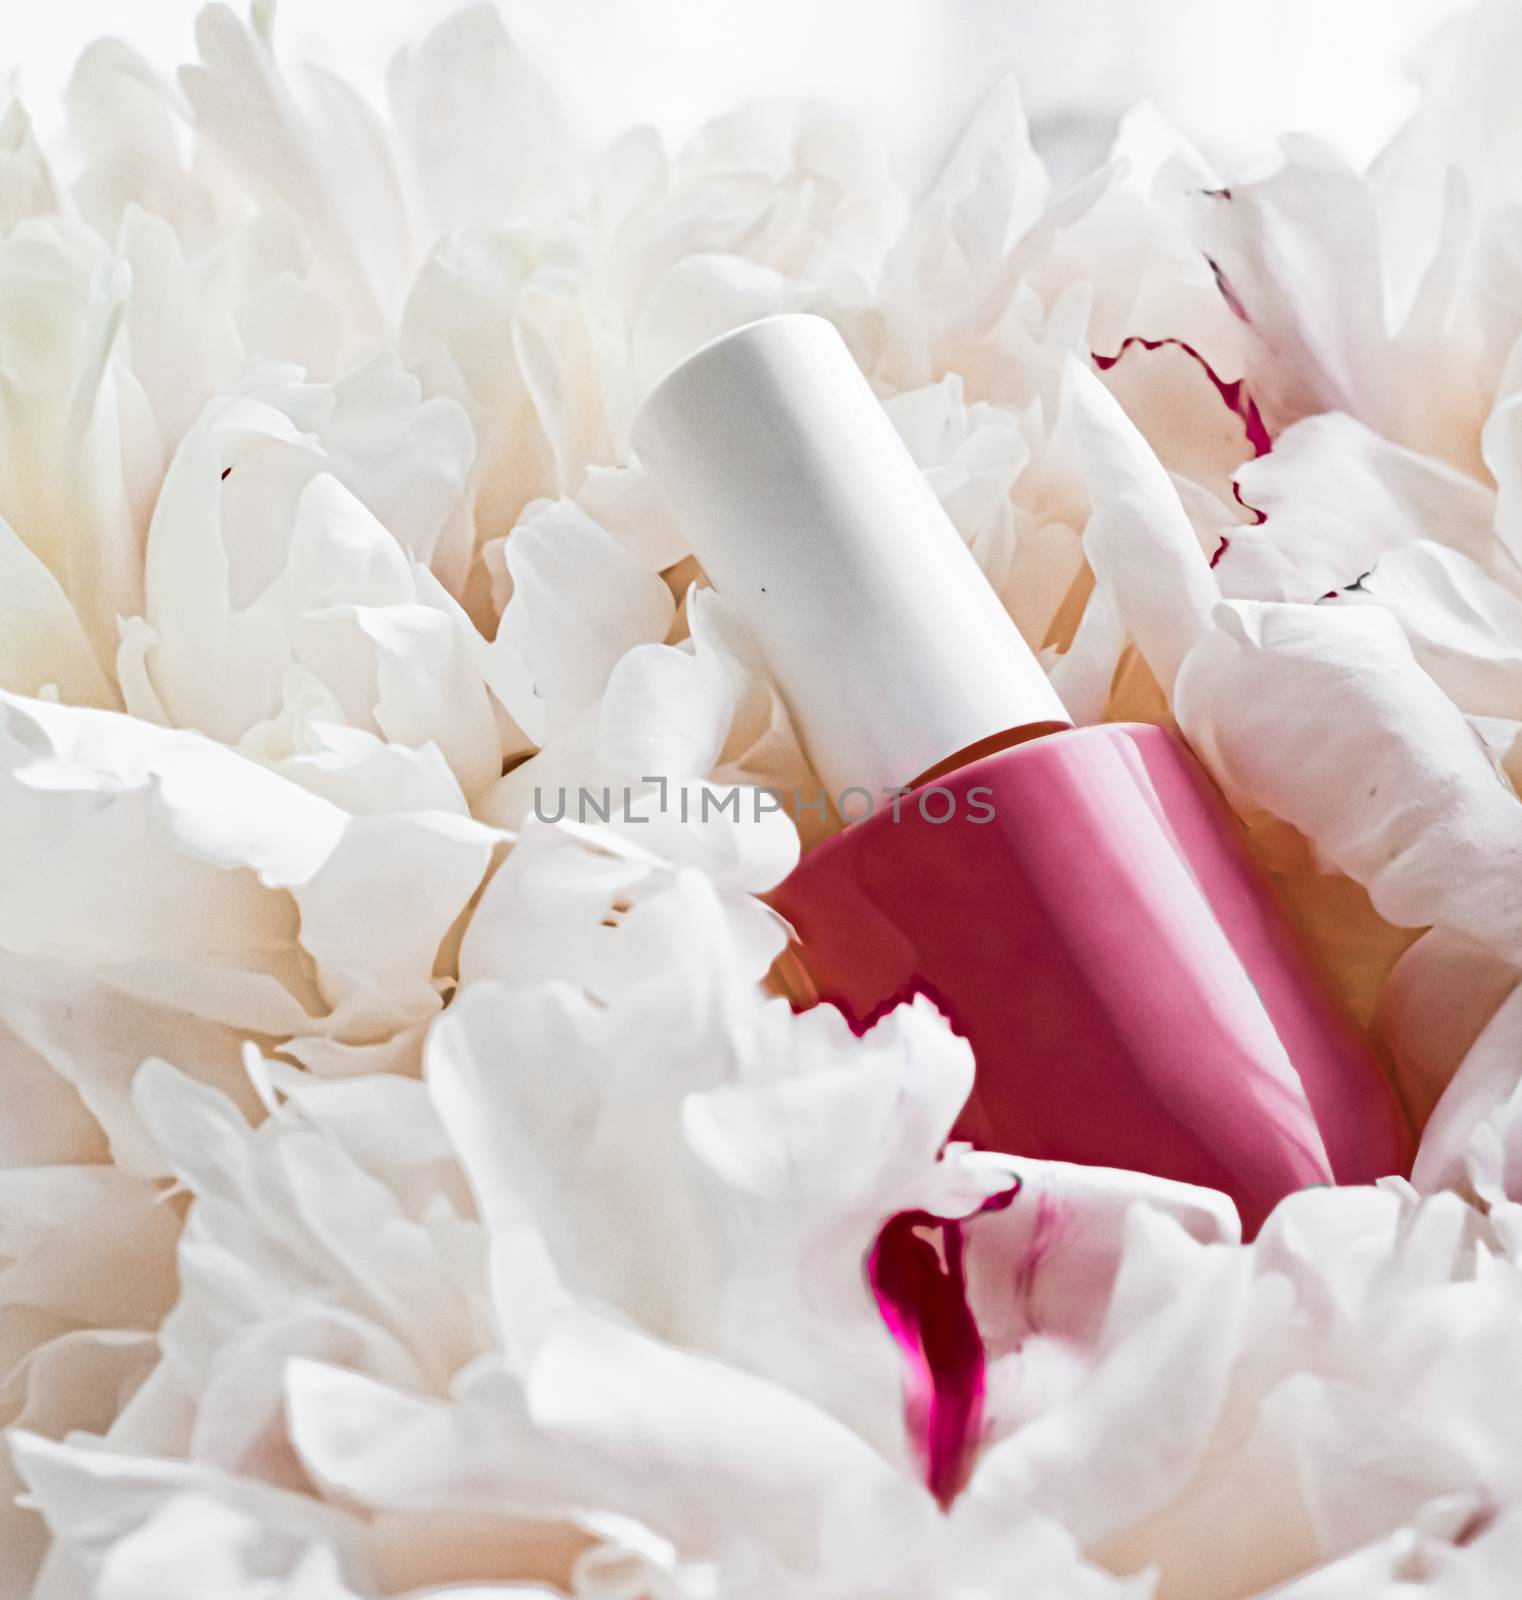 Nail polish bottles on floral background, french manicure and cosmetic branding by Anneleven